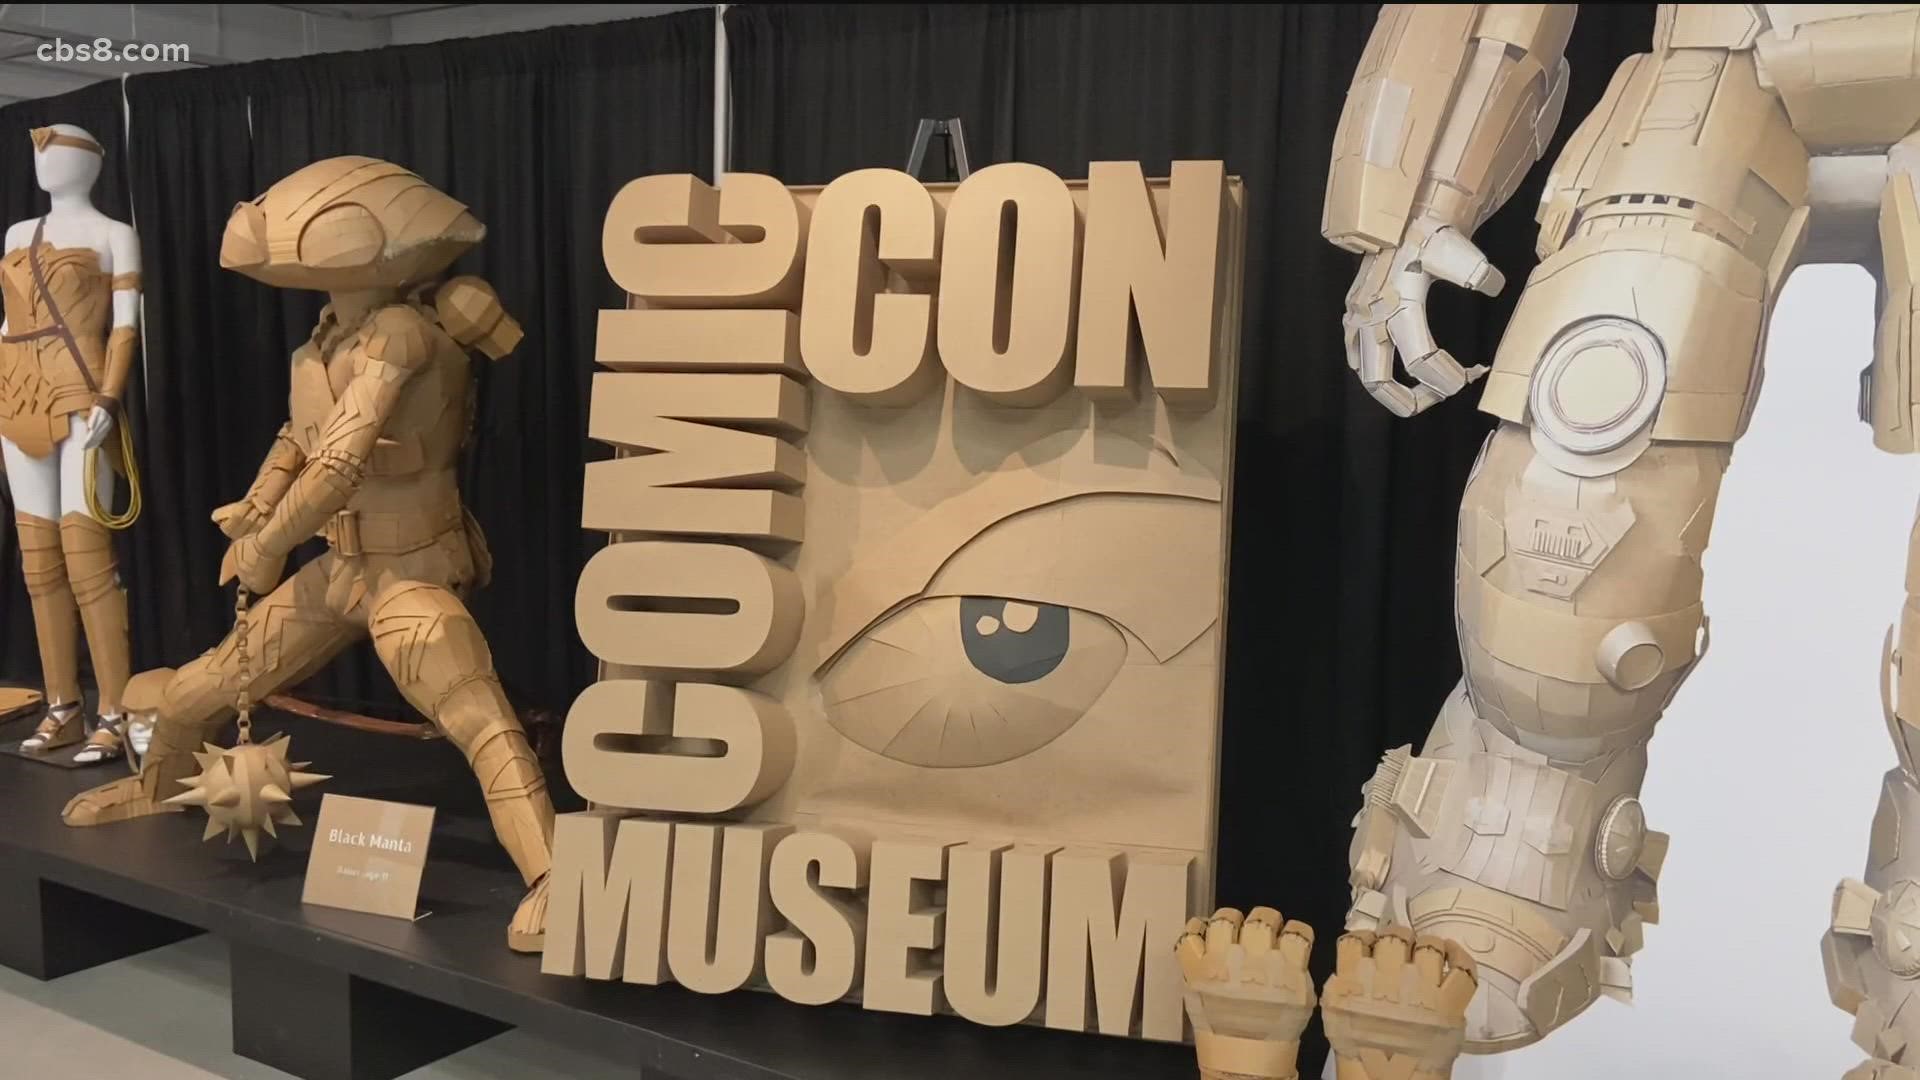 Feeding San Diego is partnering with the Comic-Con Museum to fight food insecurity. The two are hosting a contest all San Diegans can compete in.